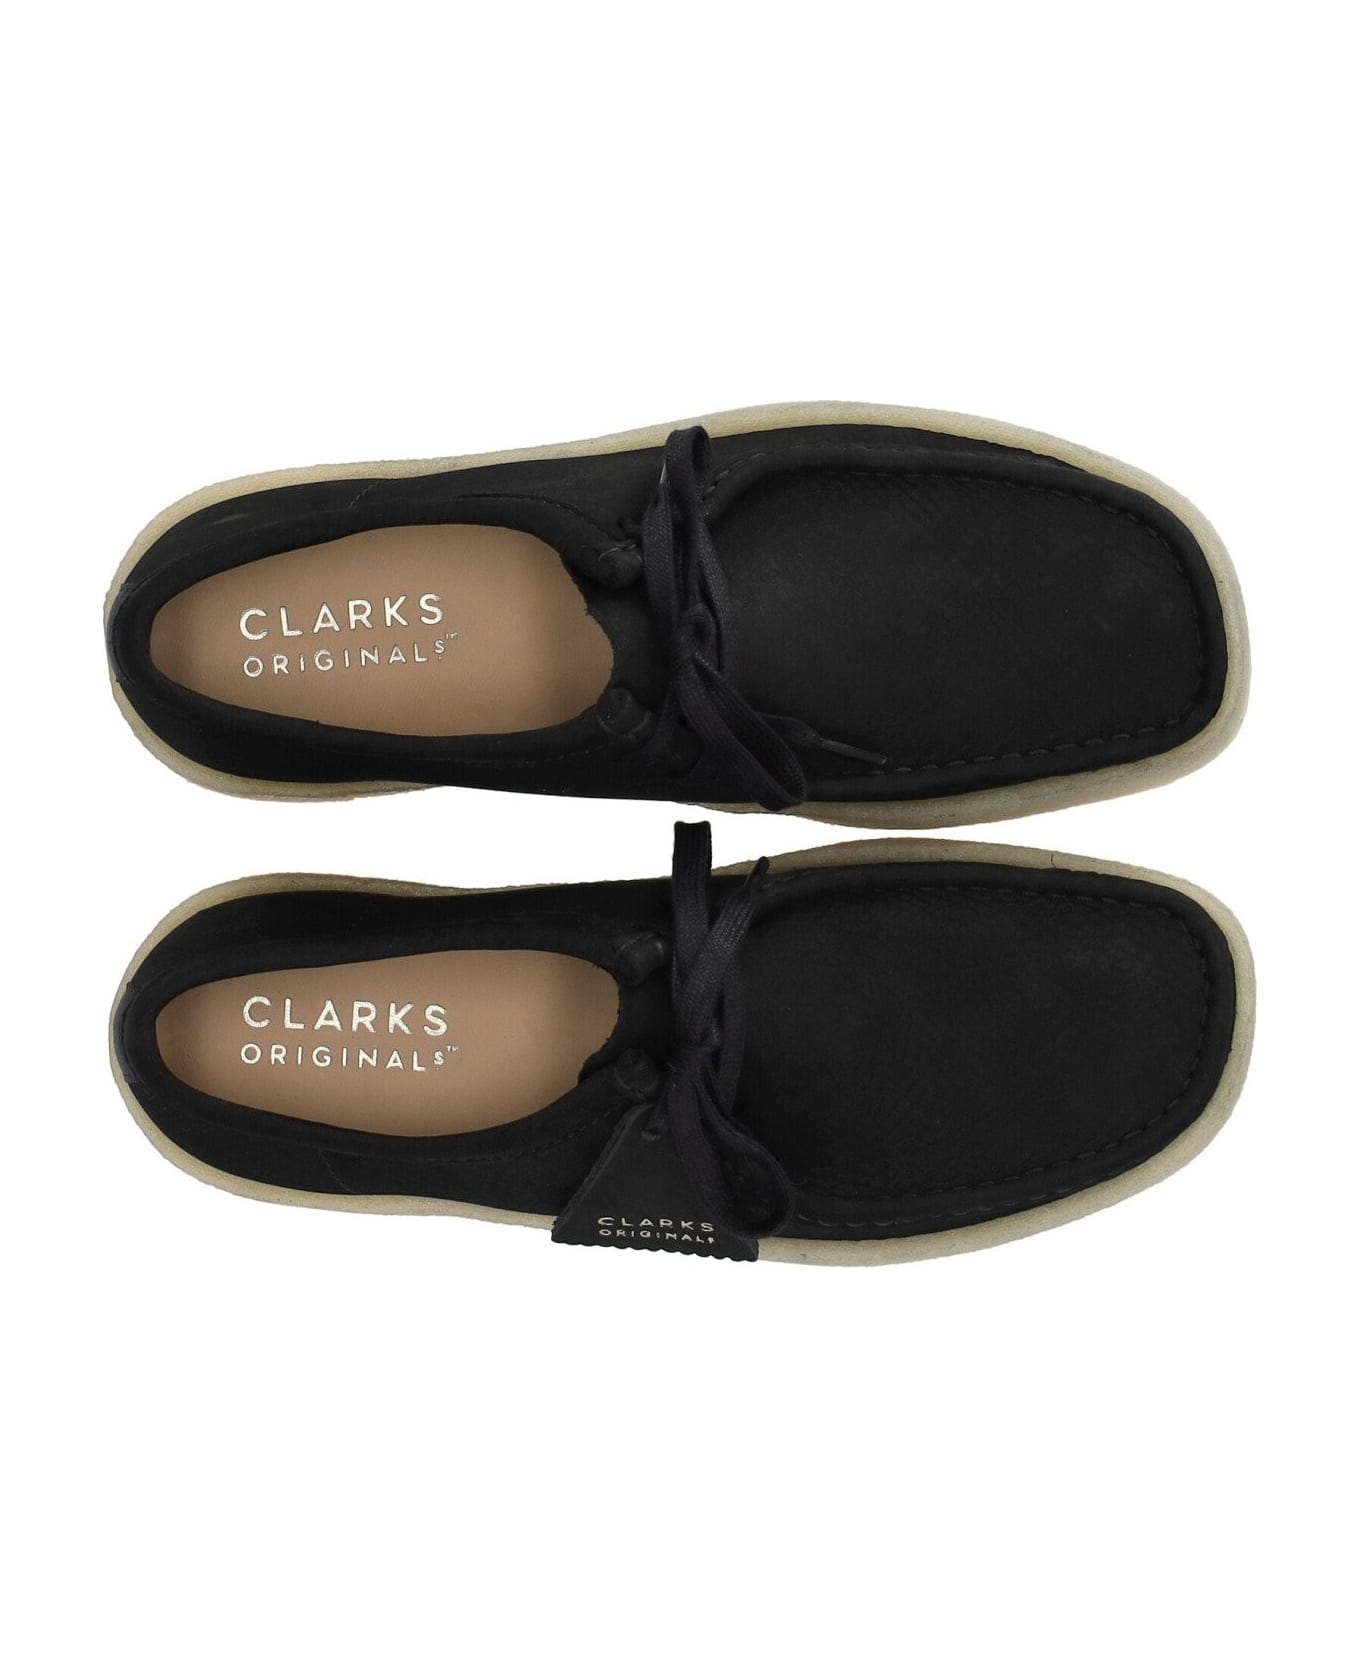 Clarks Wallabee Cup Lace Up Shoes In Black Nubuck - Nero